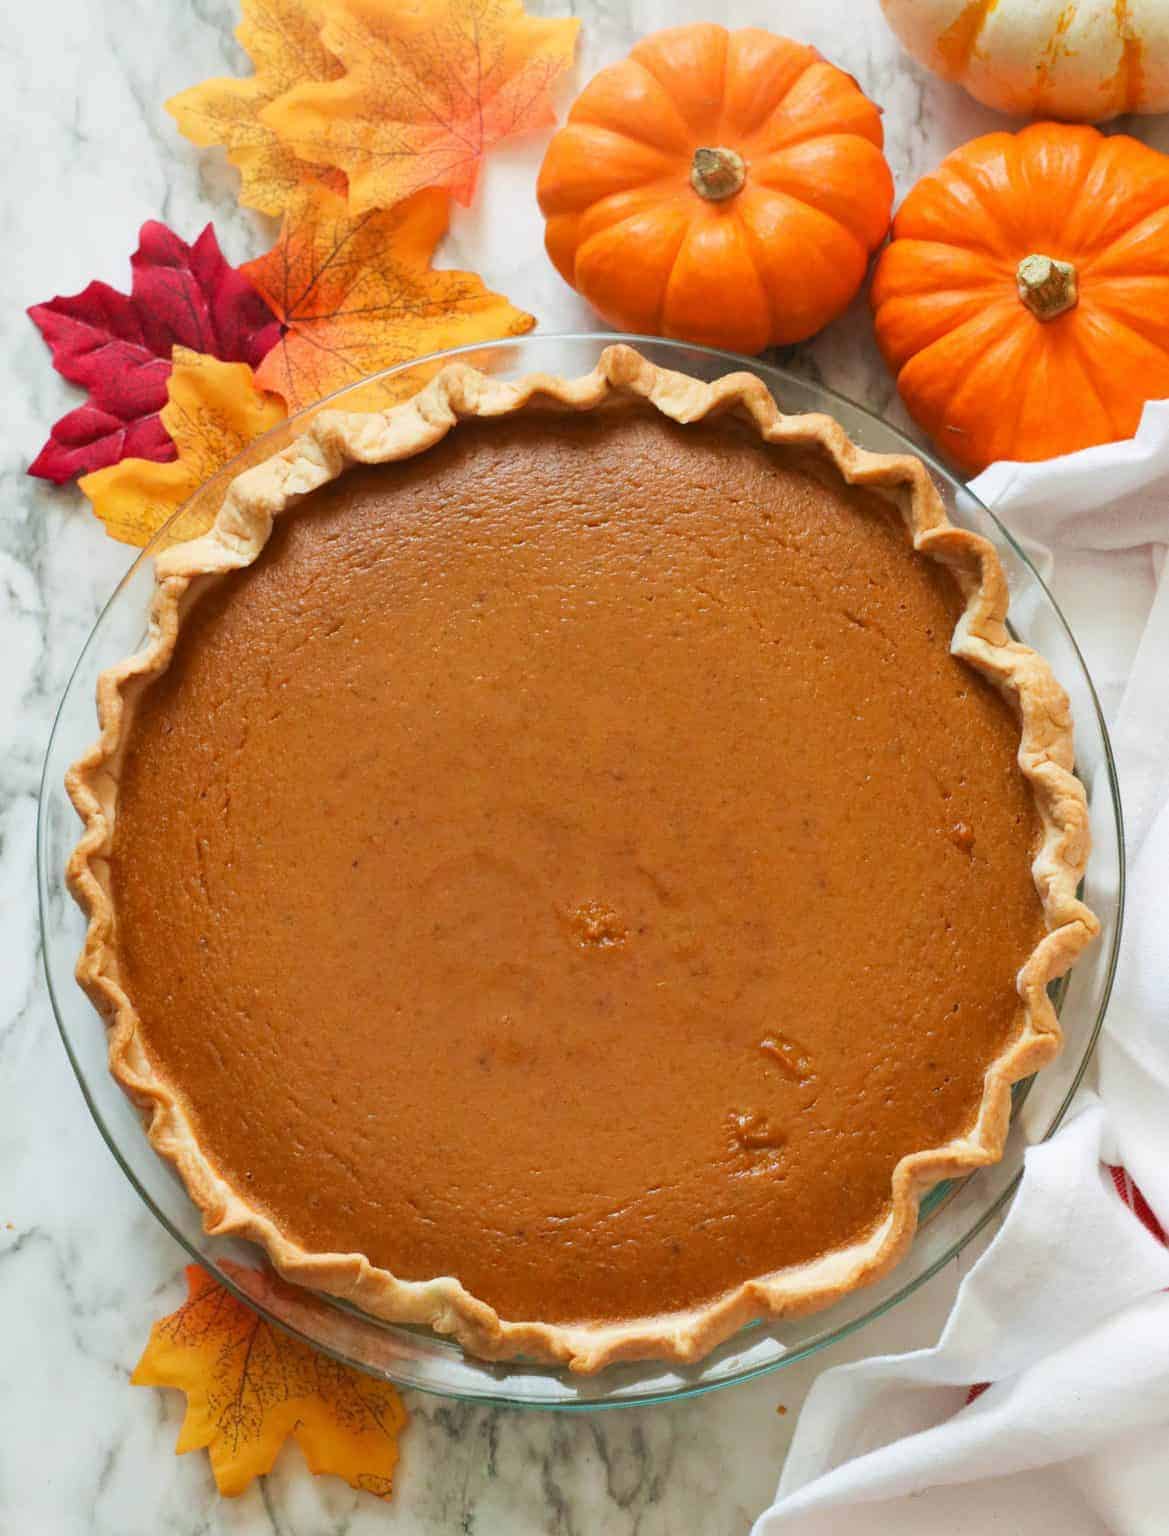 A whole pumpkin pie with decorative pumpkins in the background